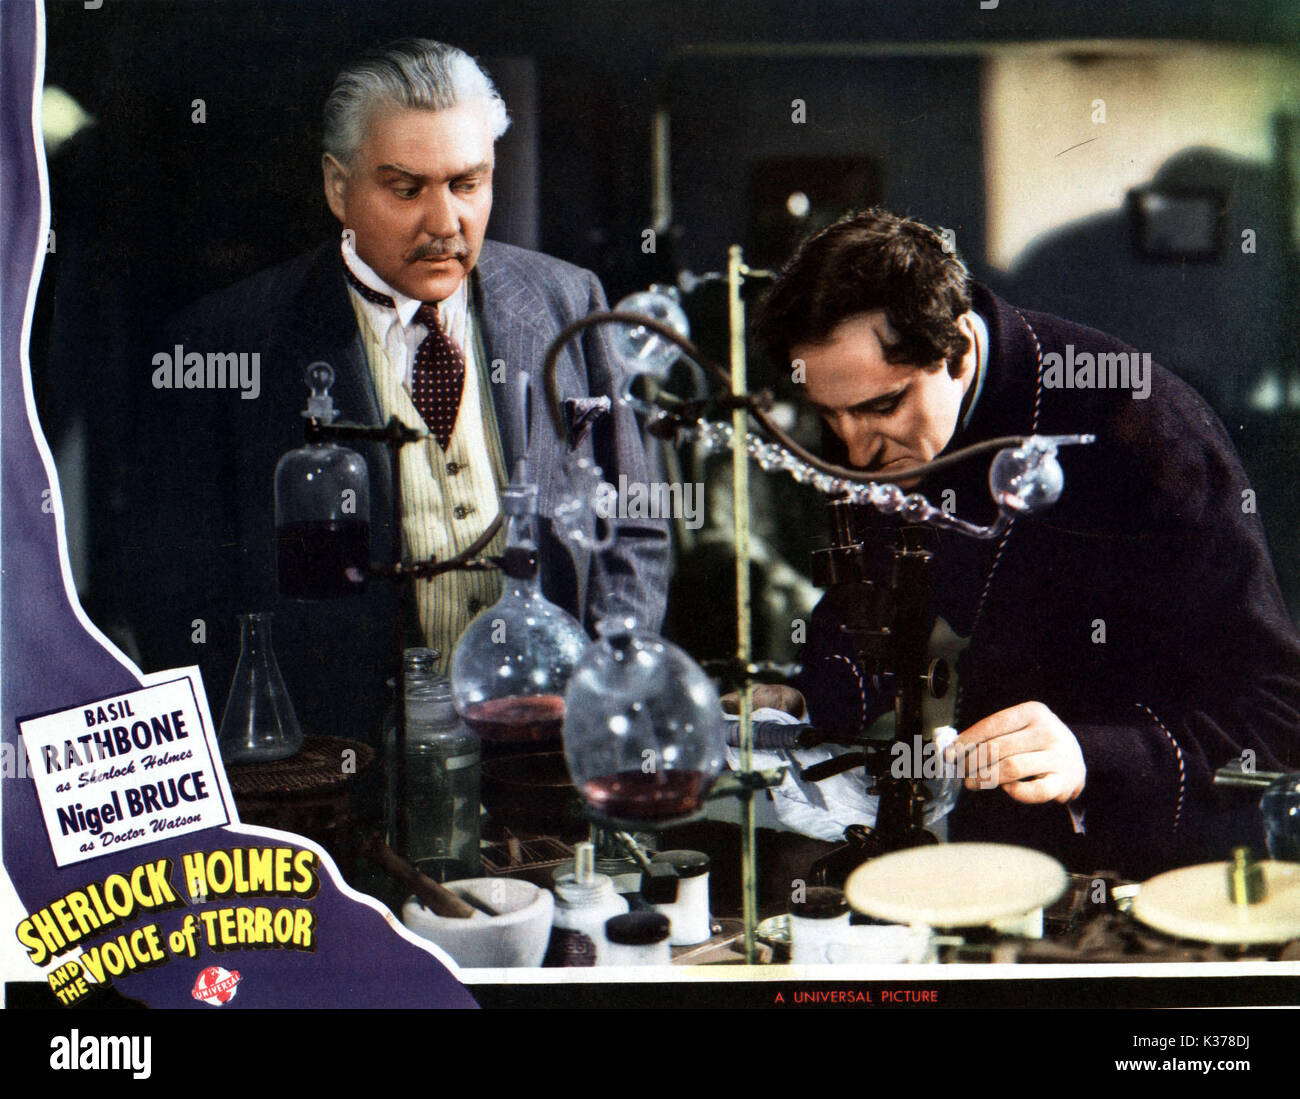 SHERLOCK HOLMES AND THE VOICE OF TERROR NIGEL BRUCE AND BASIL RATHBONE A UNIVERSAL PICTURE     Date: 1942 Stock Photo